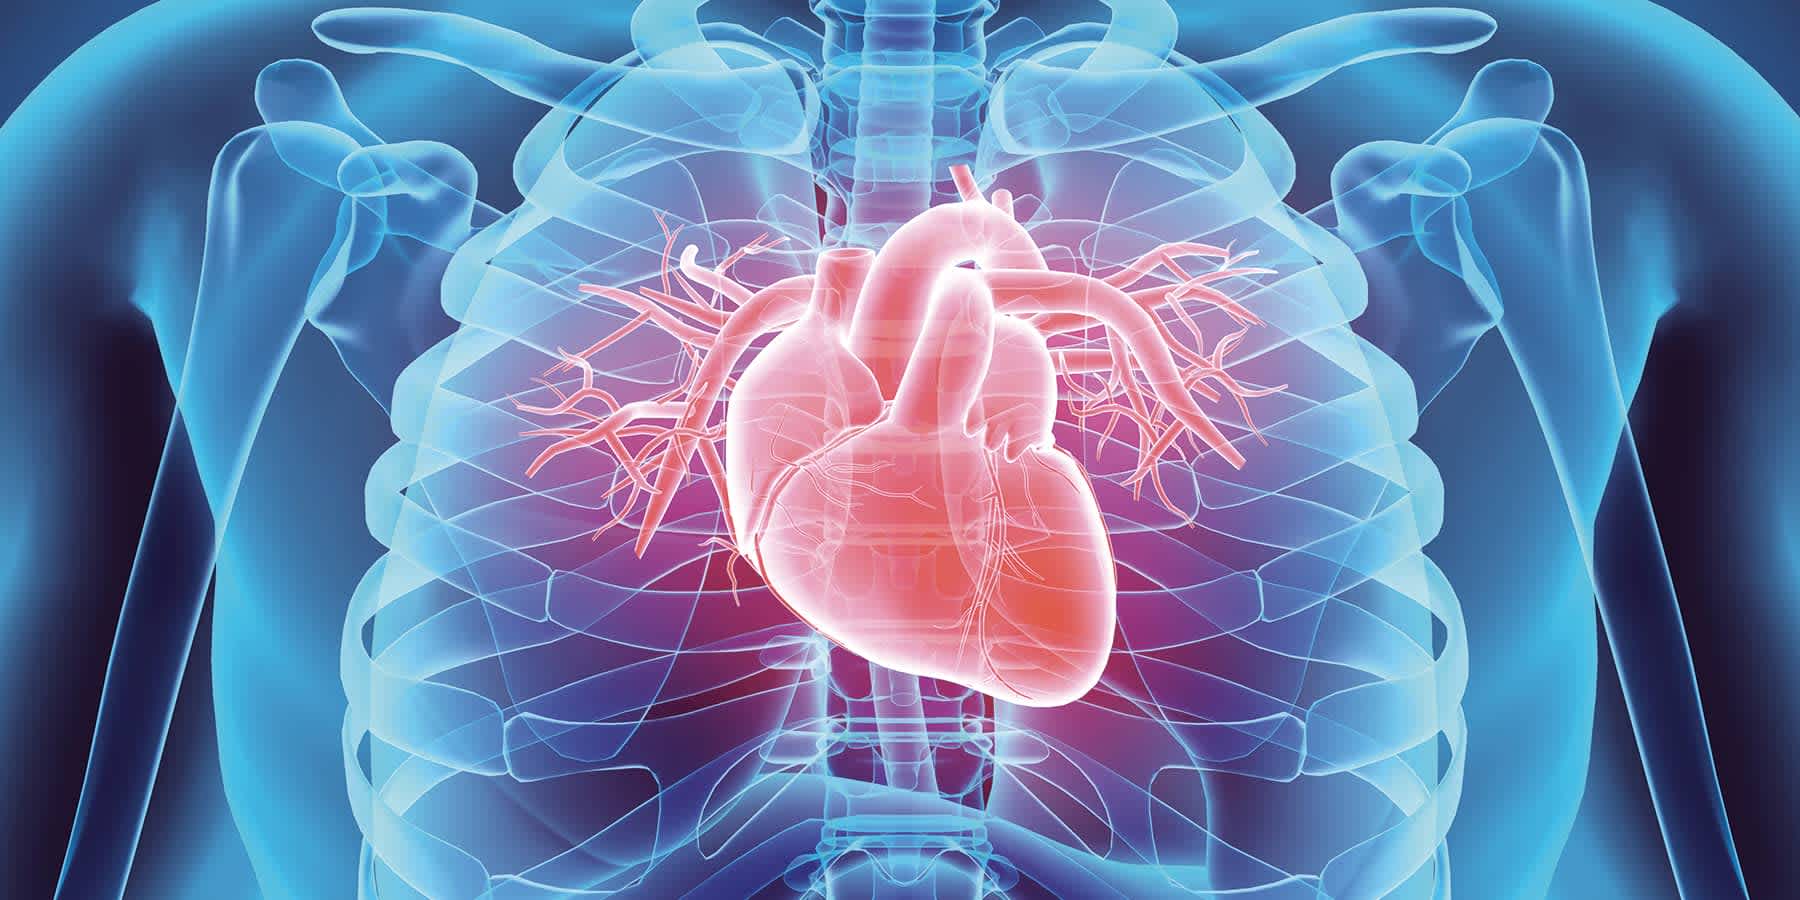 Heart Attack Symptoms, Risk, and Recovery